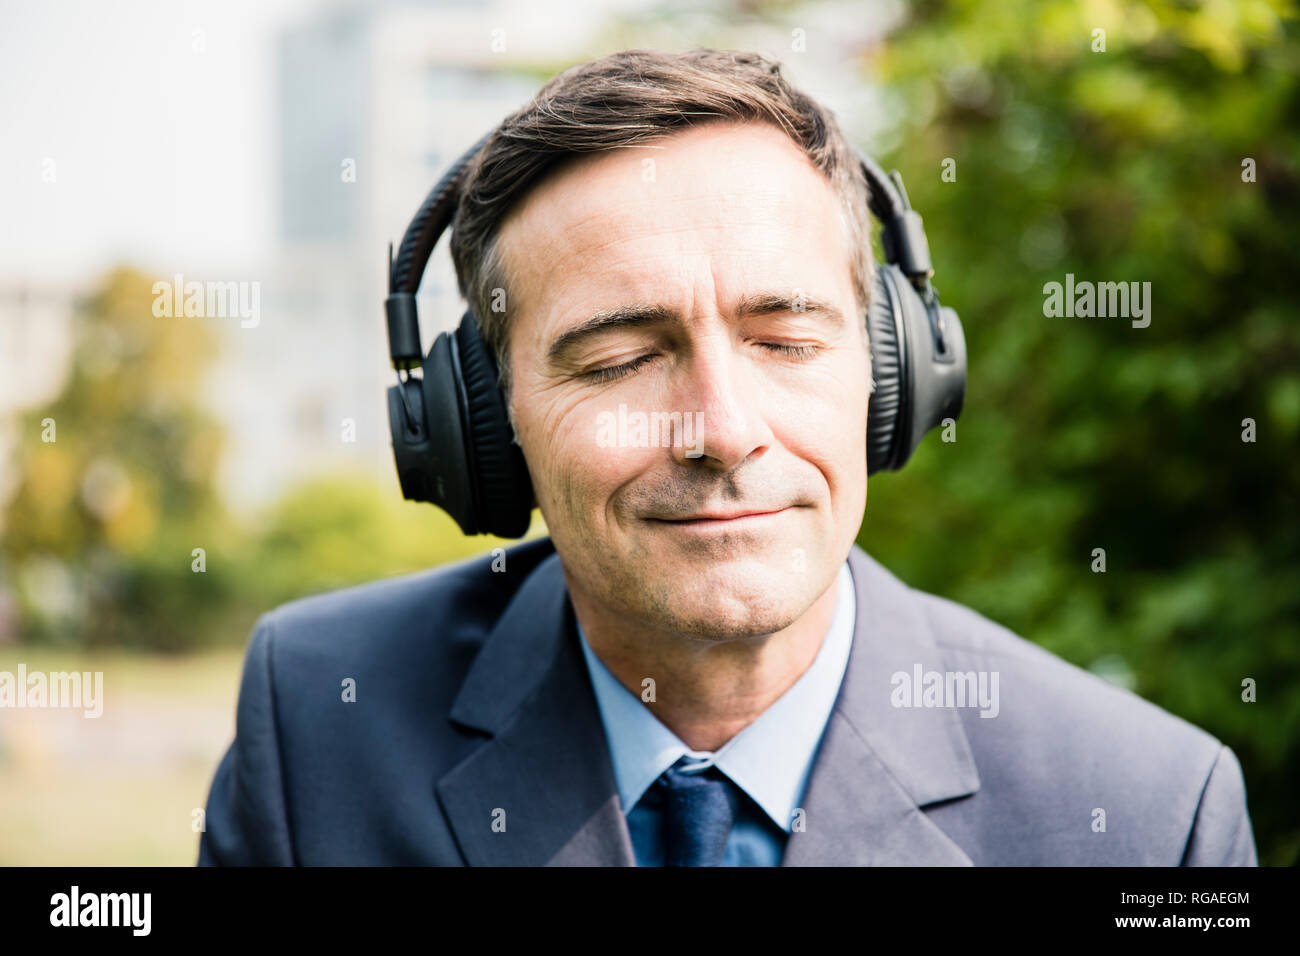 Businessman with closed eyes listening to music with headphones Stock Photo